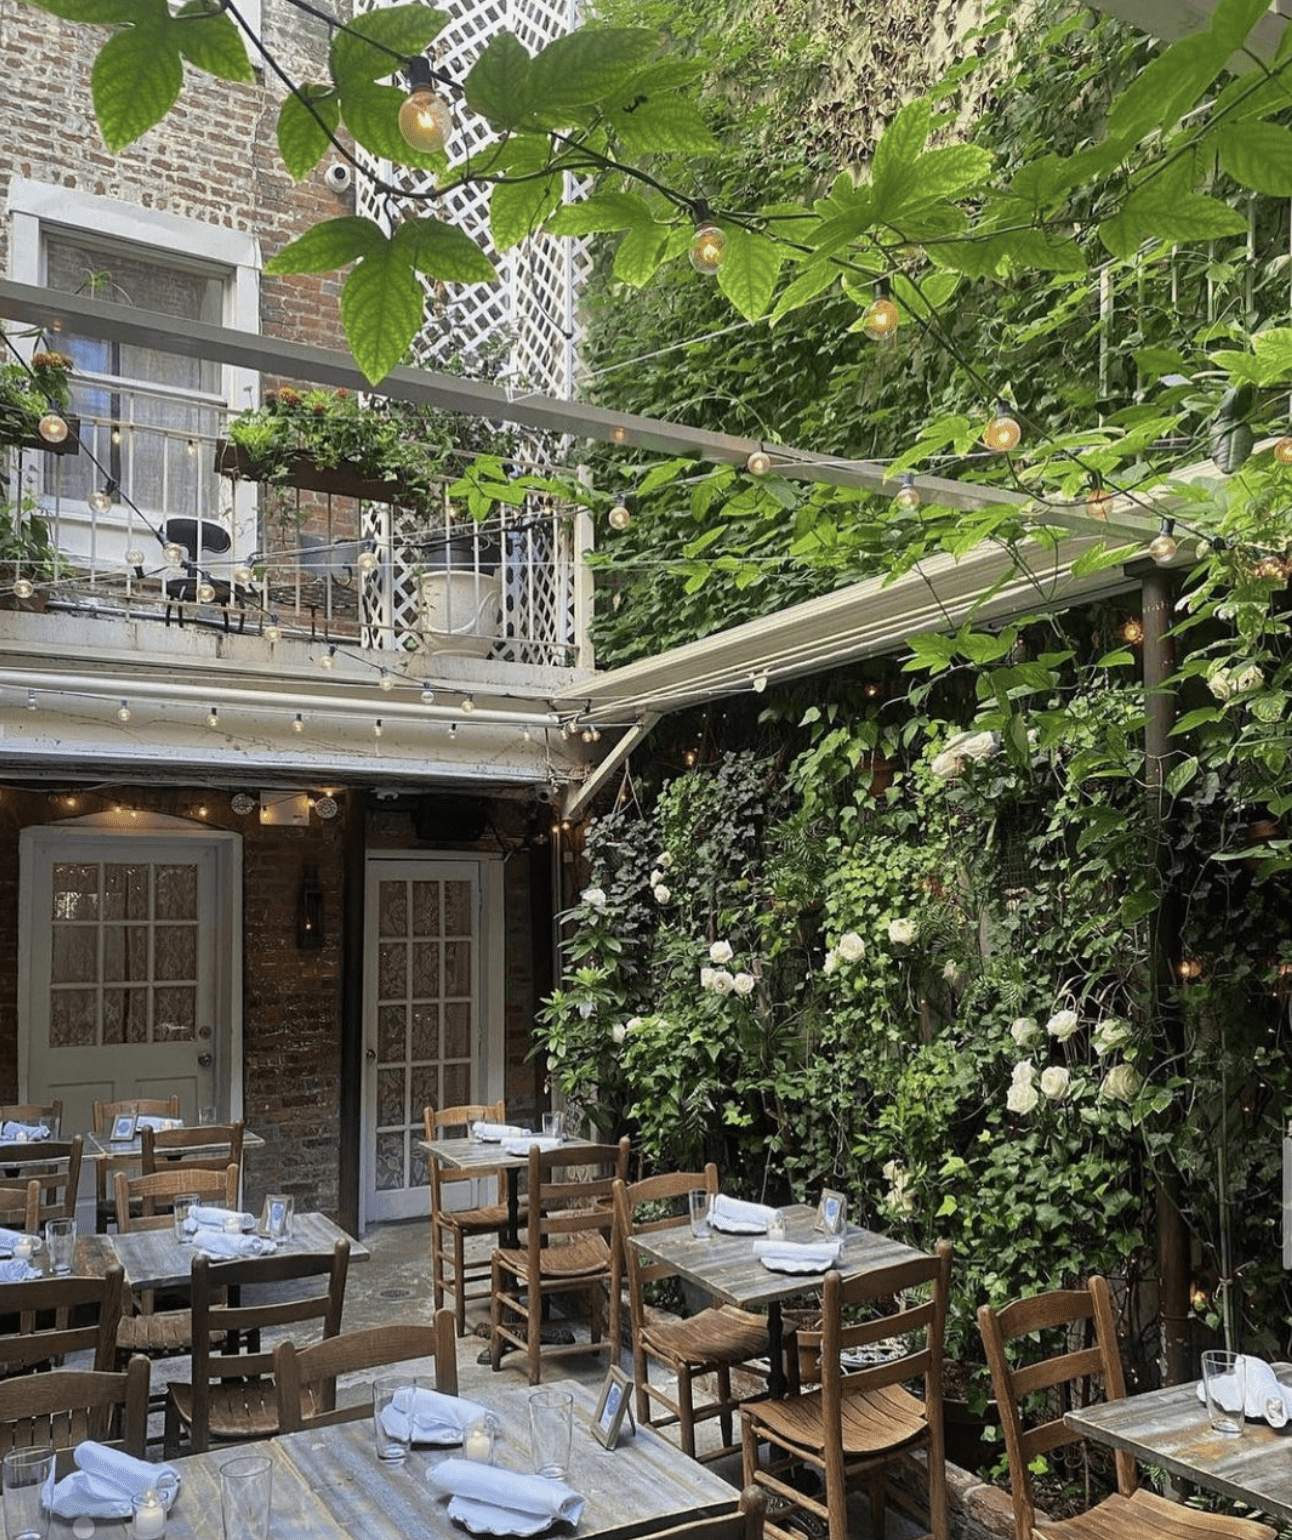 The best outdoor bars and restaurants in New York City | The verdant courtyard at Palma